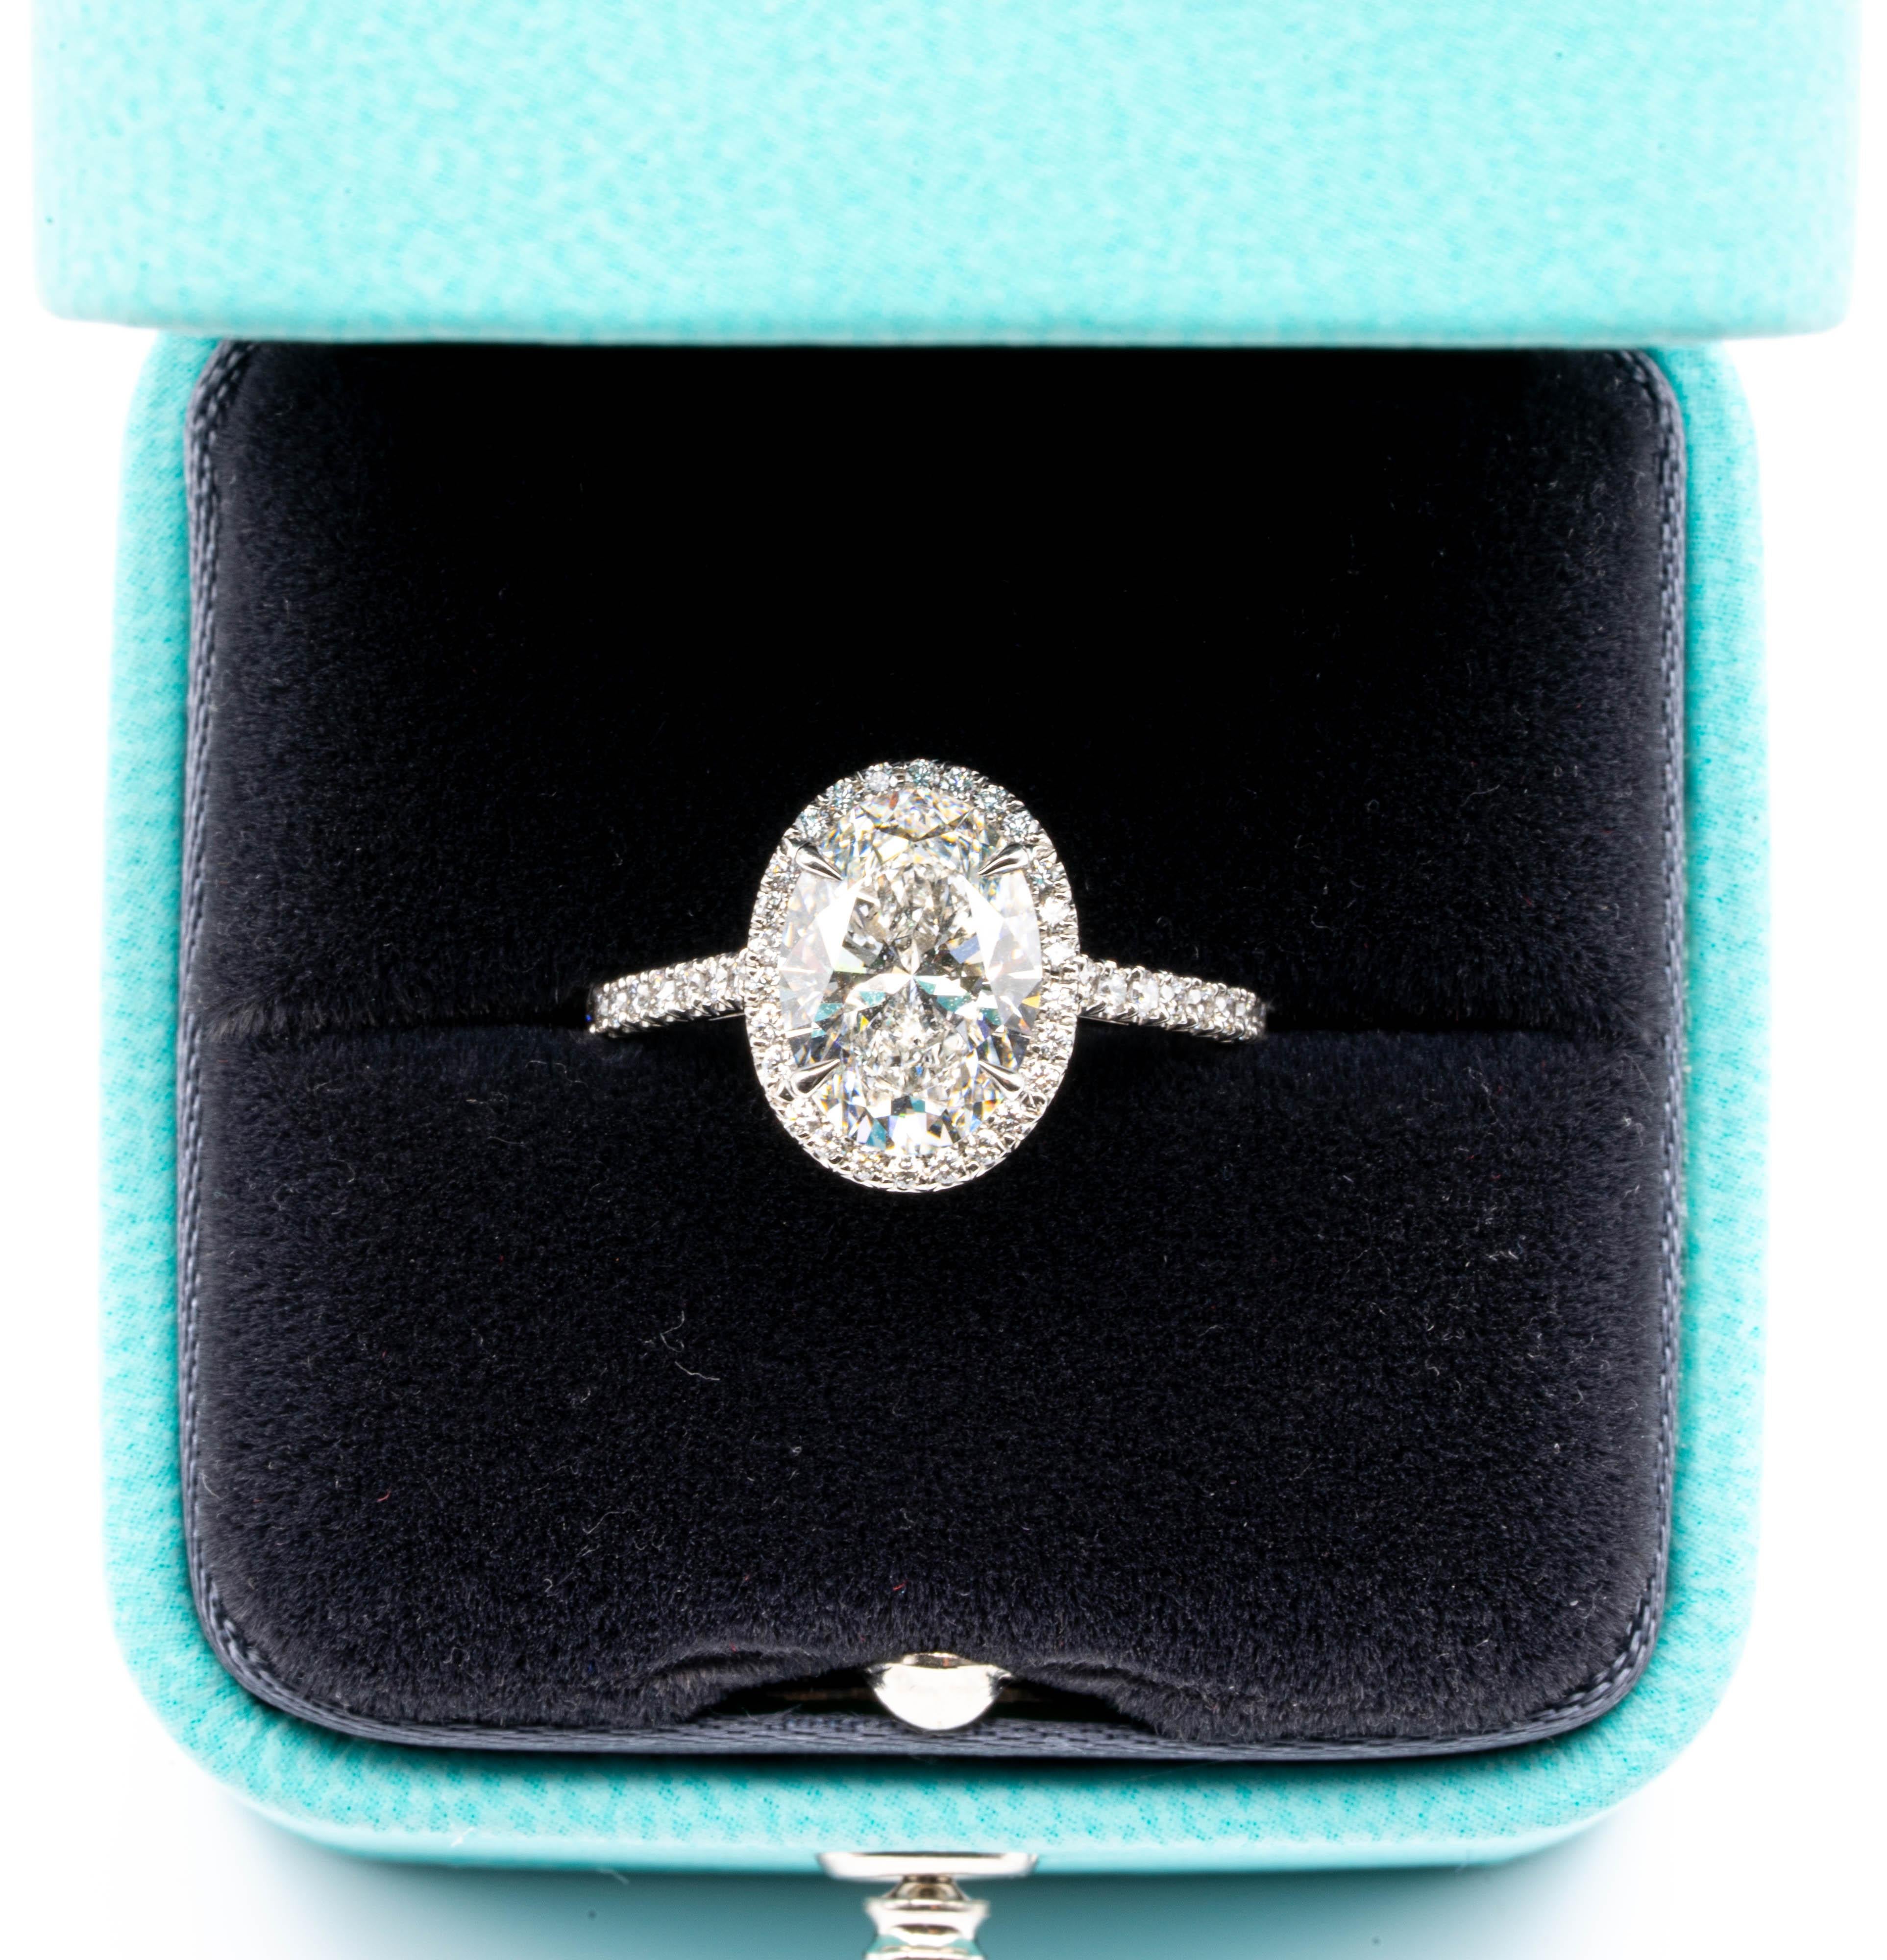 Tiffany & Co. Platinum Soleste Oval Diamond Engagement Ring F VS1 2.33 Cts Total 2